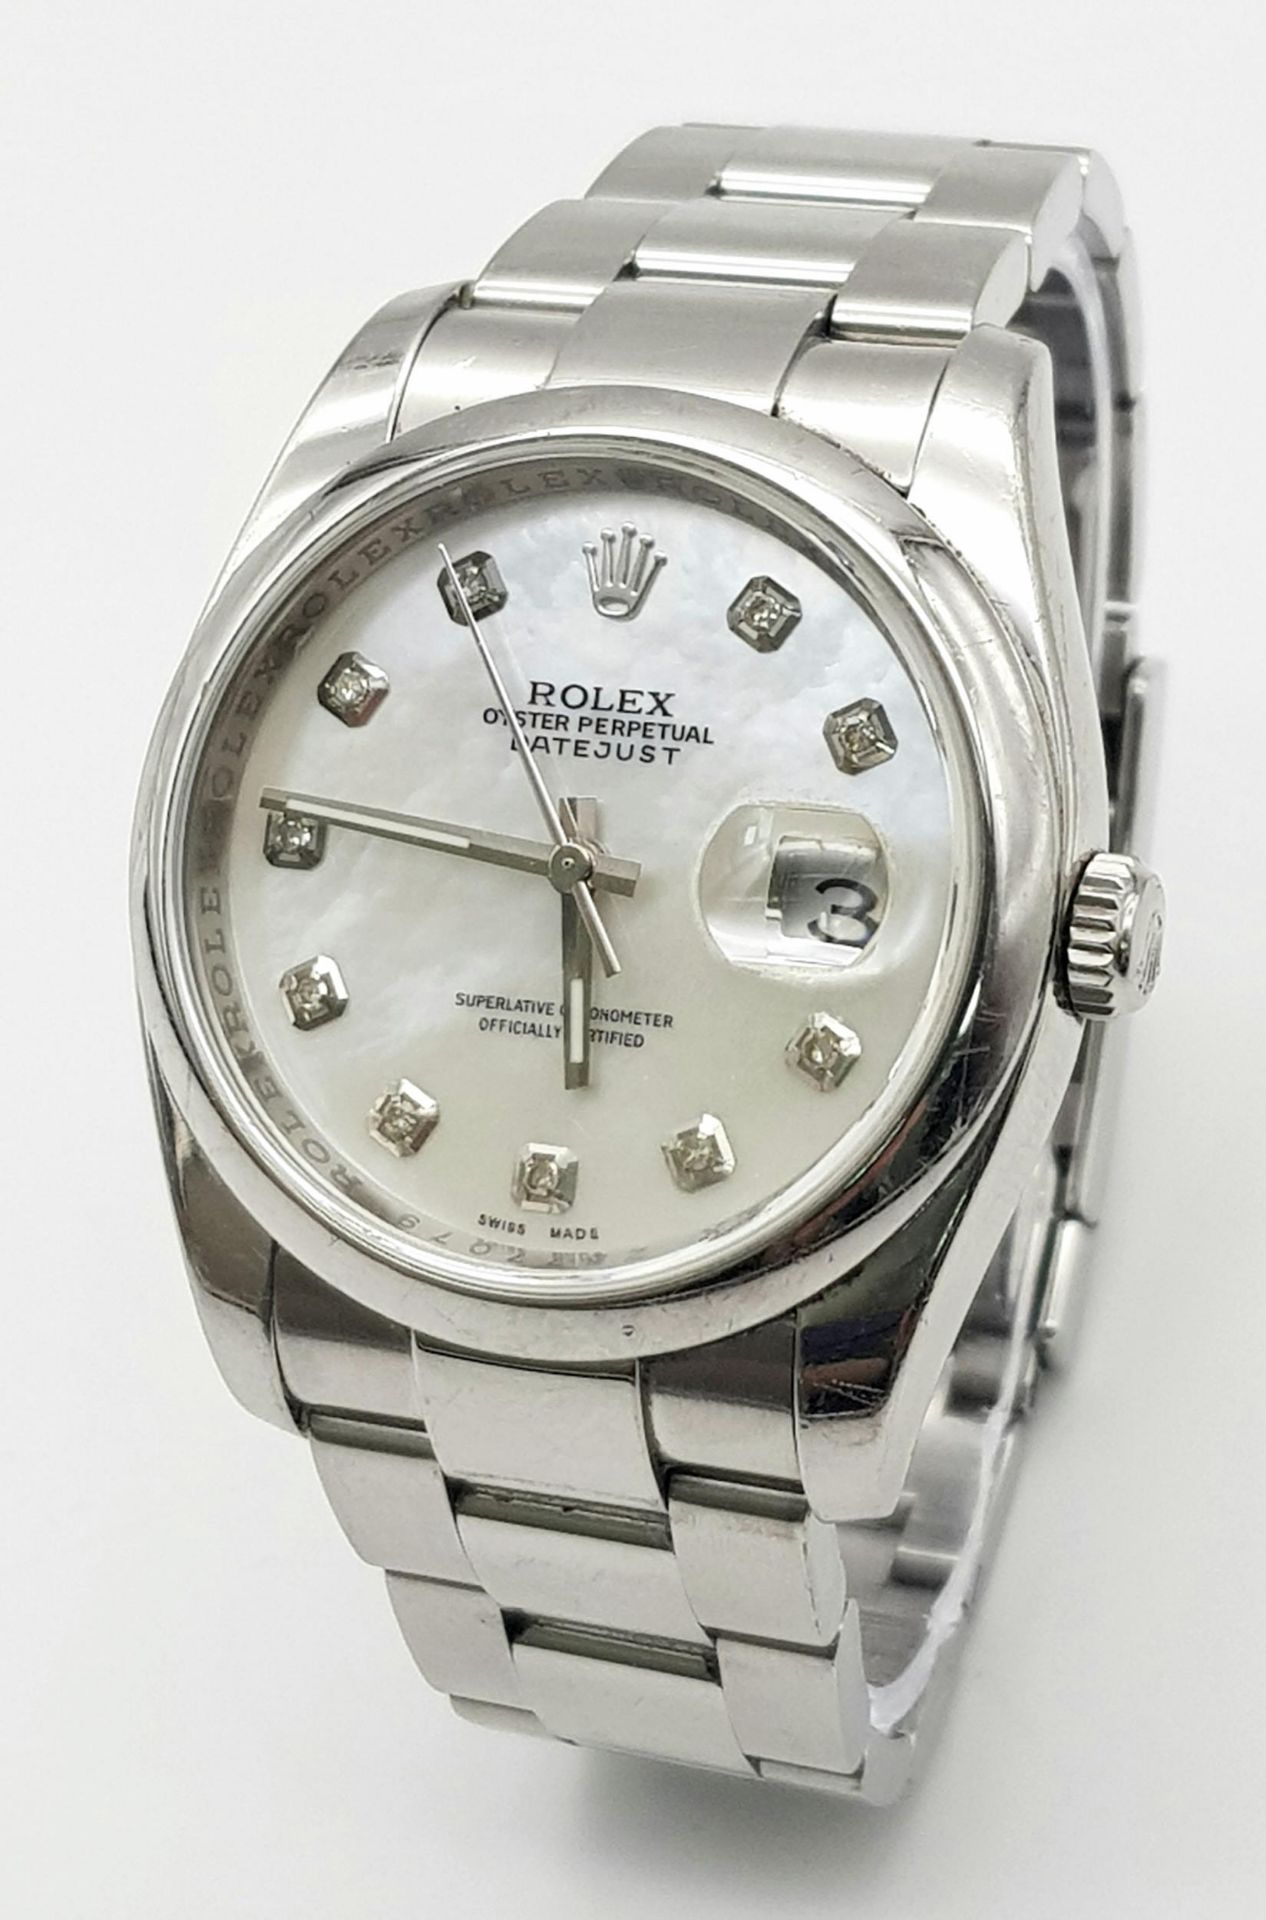 A Rolex Datejust Diamond Gents Automatic Watch. Stainless steel bracelet and case - 36mm. Mother - Image 2 of 7